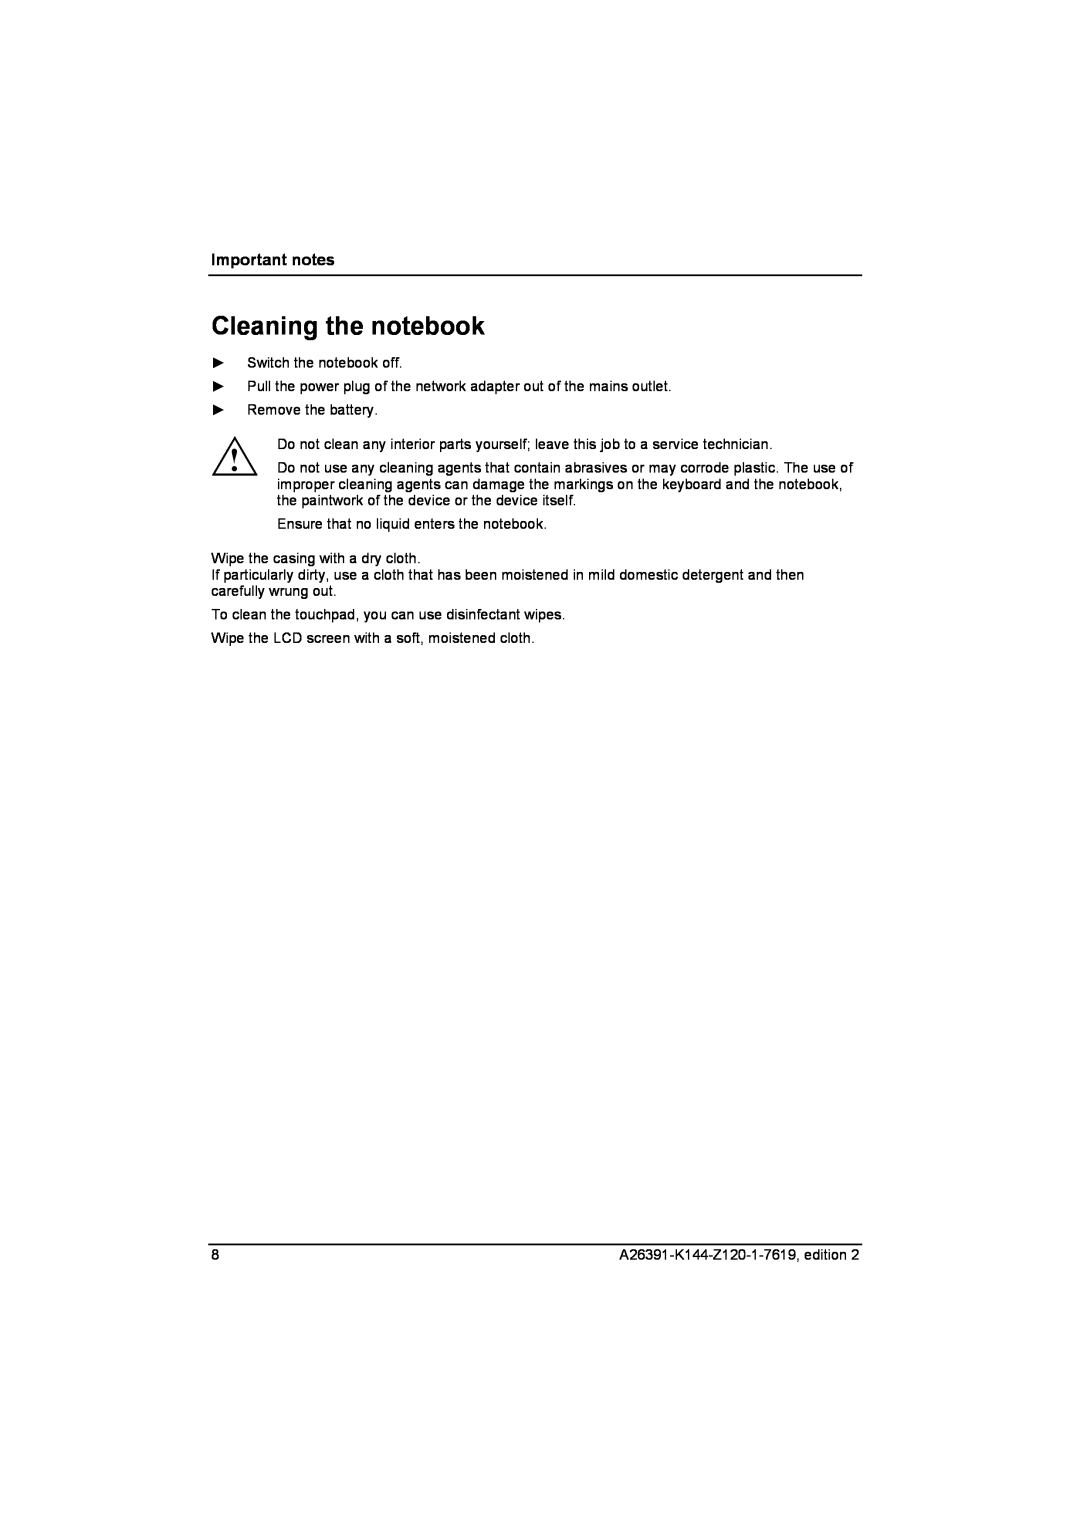 Fujitsu S SERIES manual Cleaning the notebook, Important notes 